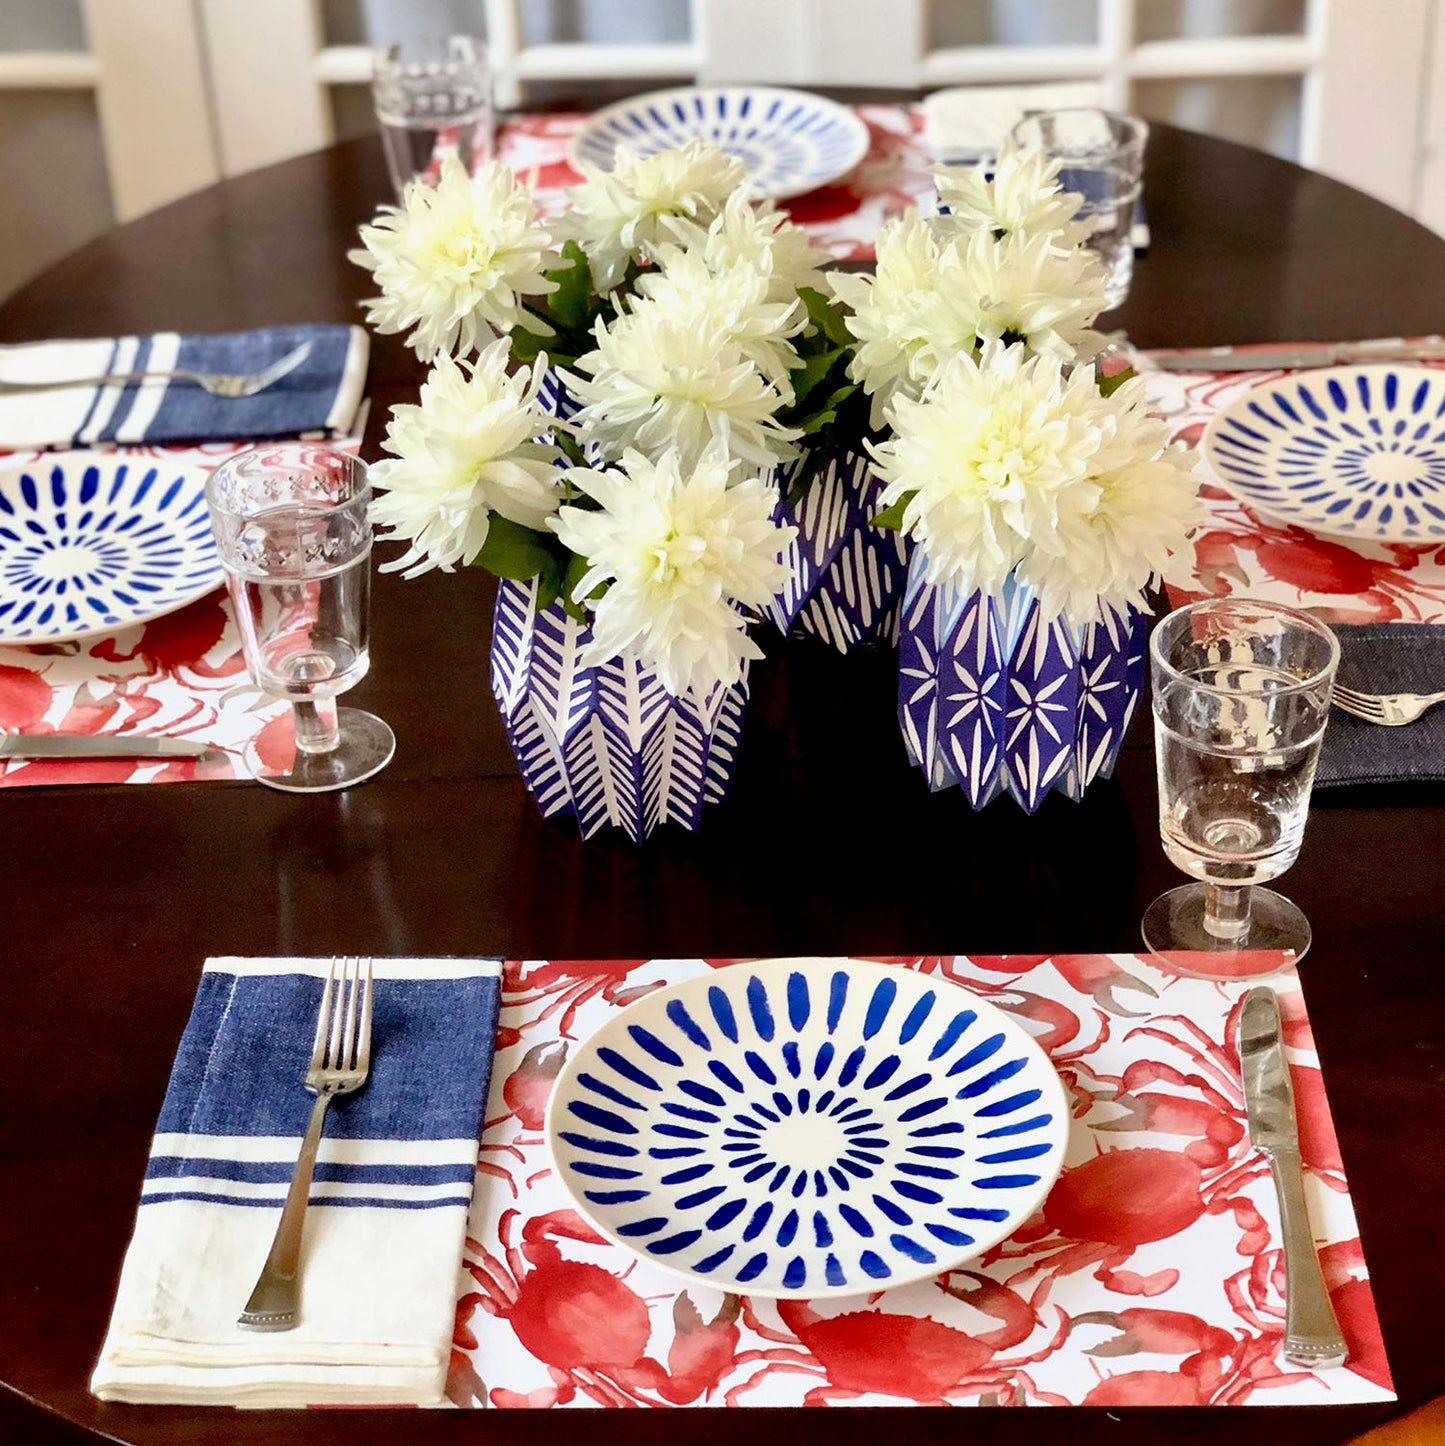 Table setting with red and white crab paper placemats layered with blue and white plates and blue and white vases with white flowers